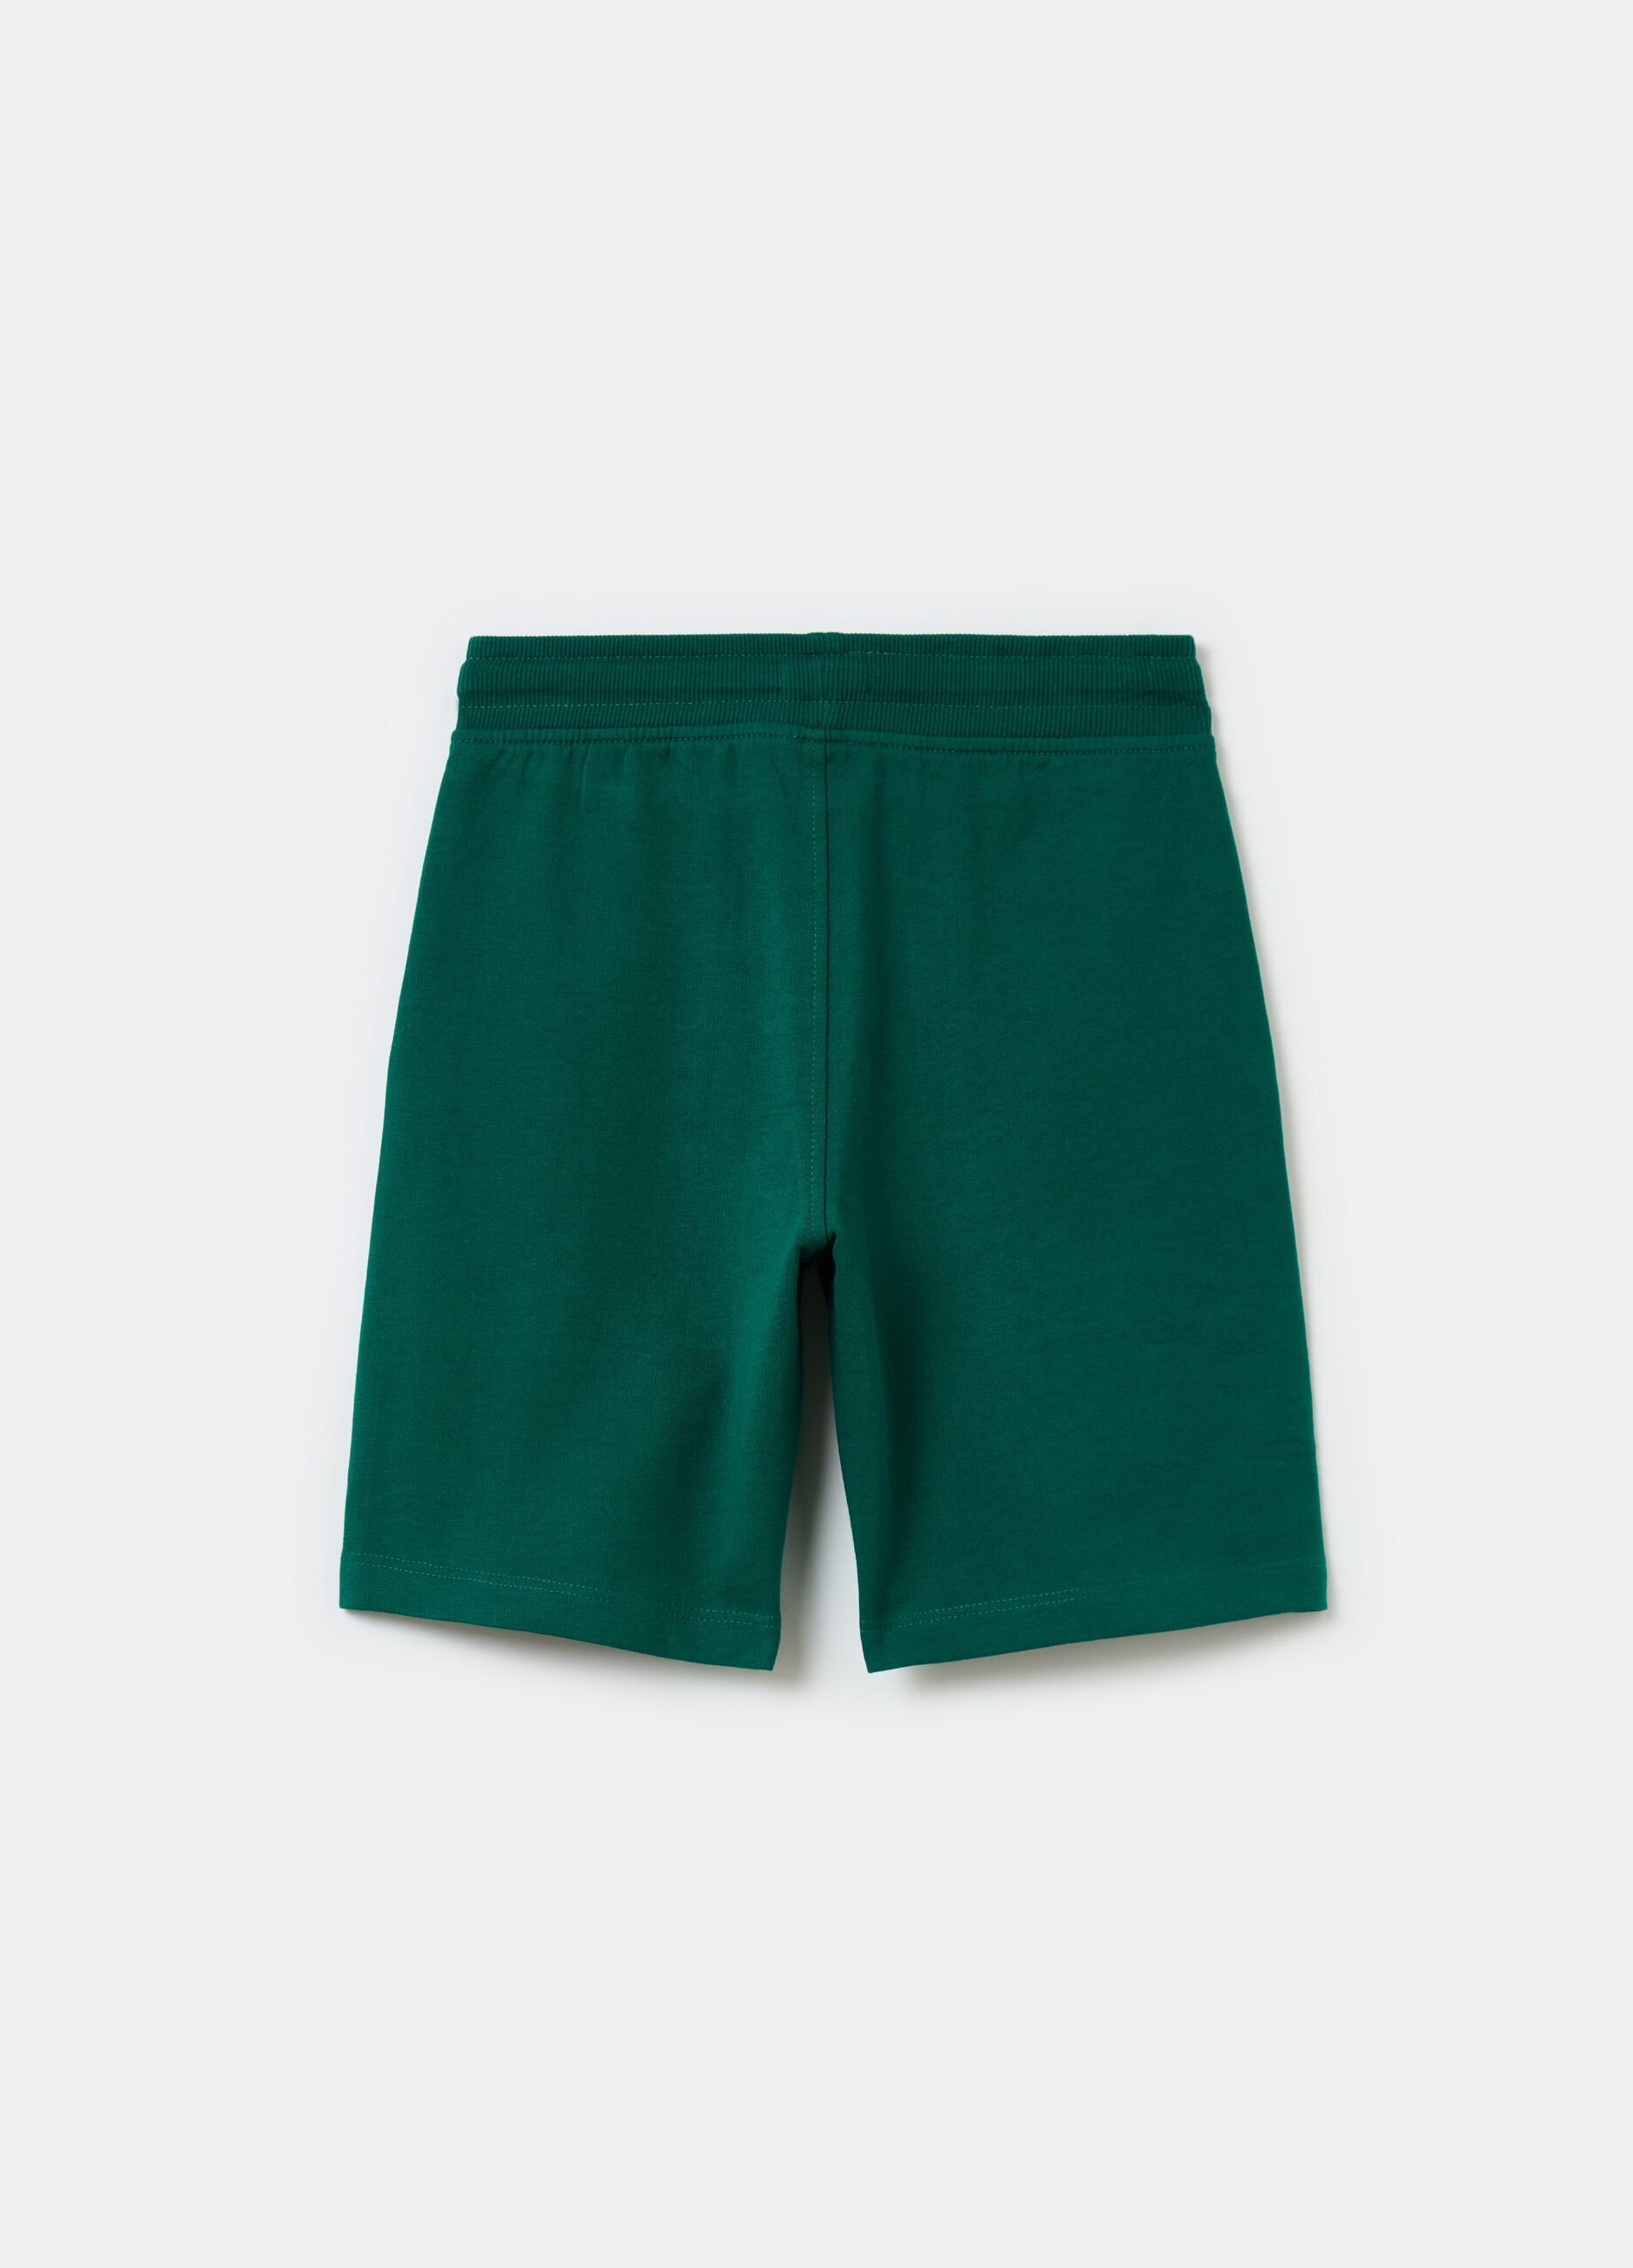 French Terry Bermuda shorts with drawstring